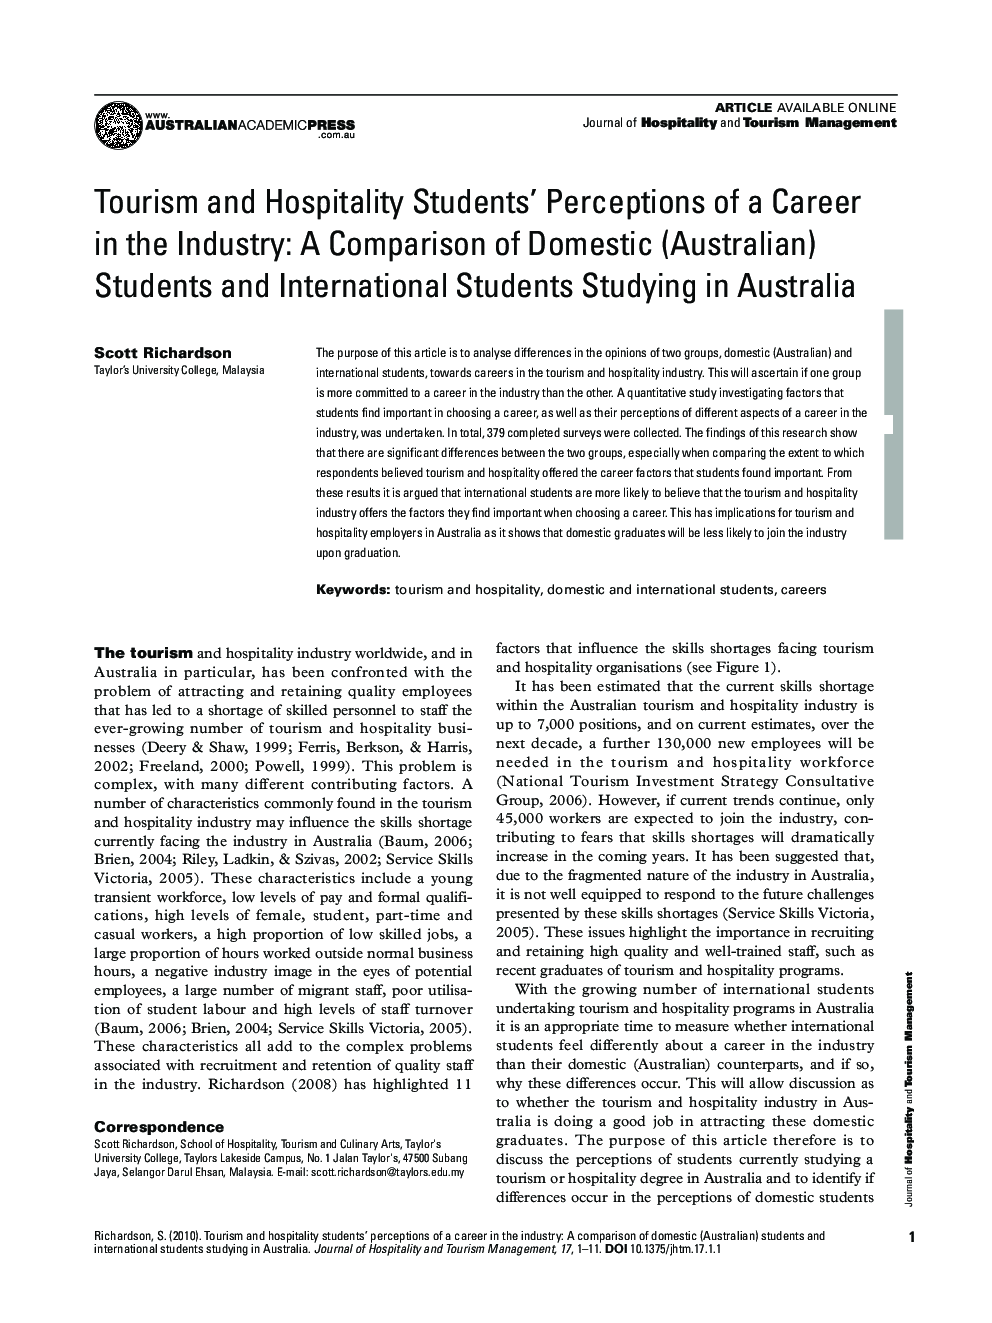 Tourism and Hospitality Students' Perceptions of a Career in the Industry: A Comparison of Domestic (Australian) Students and International Students Studying in Australia